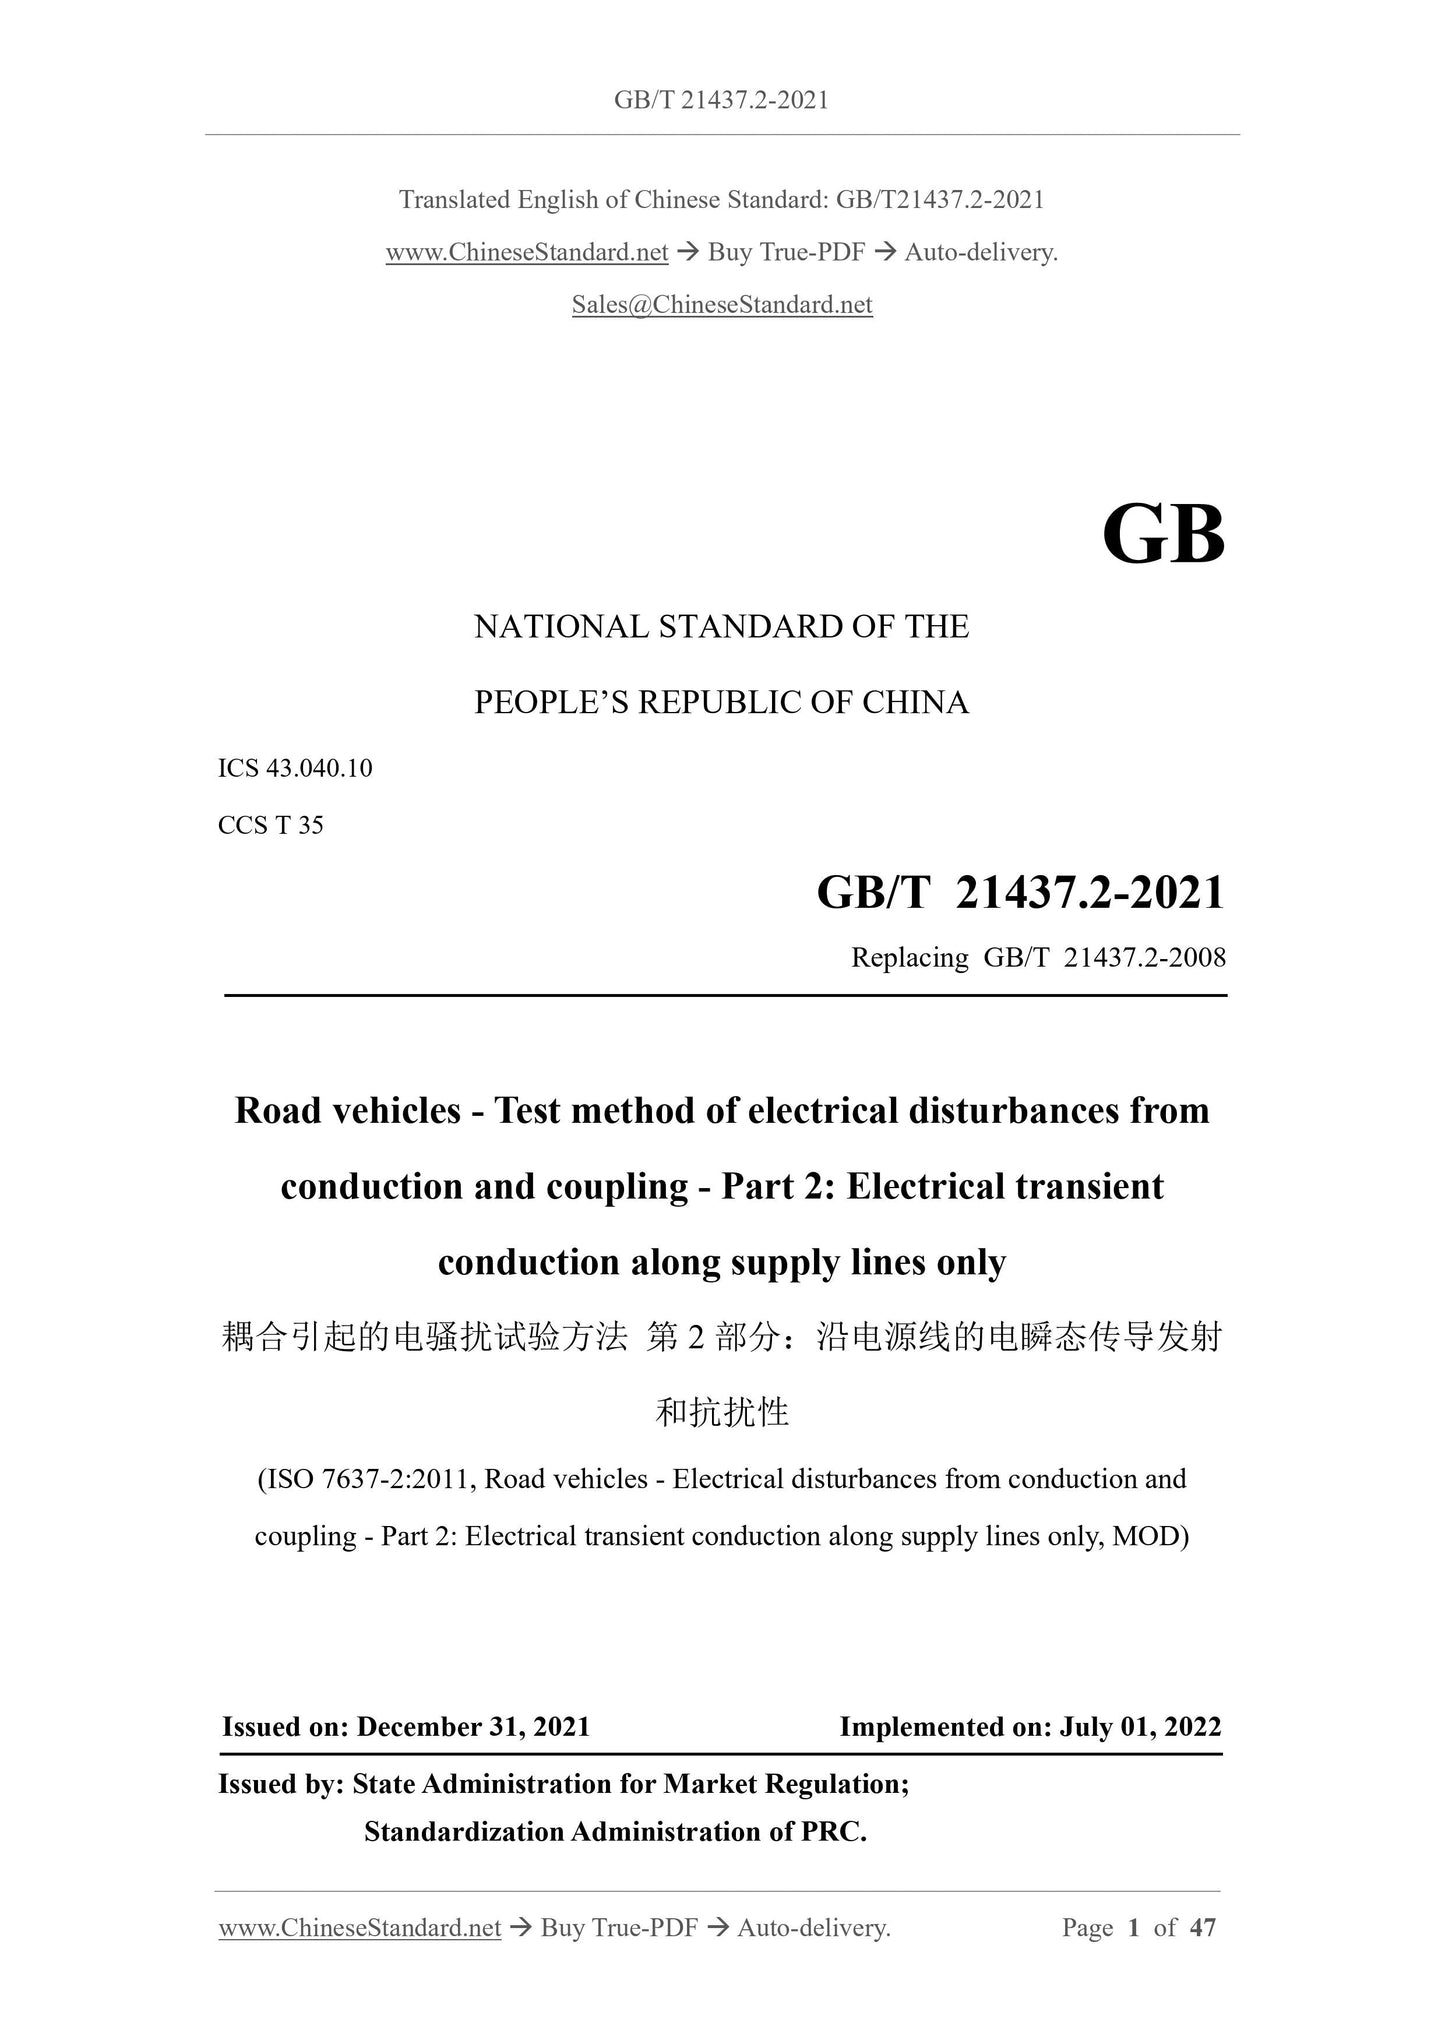 GB/T 21437.2-2021 Page 1